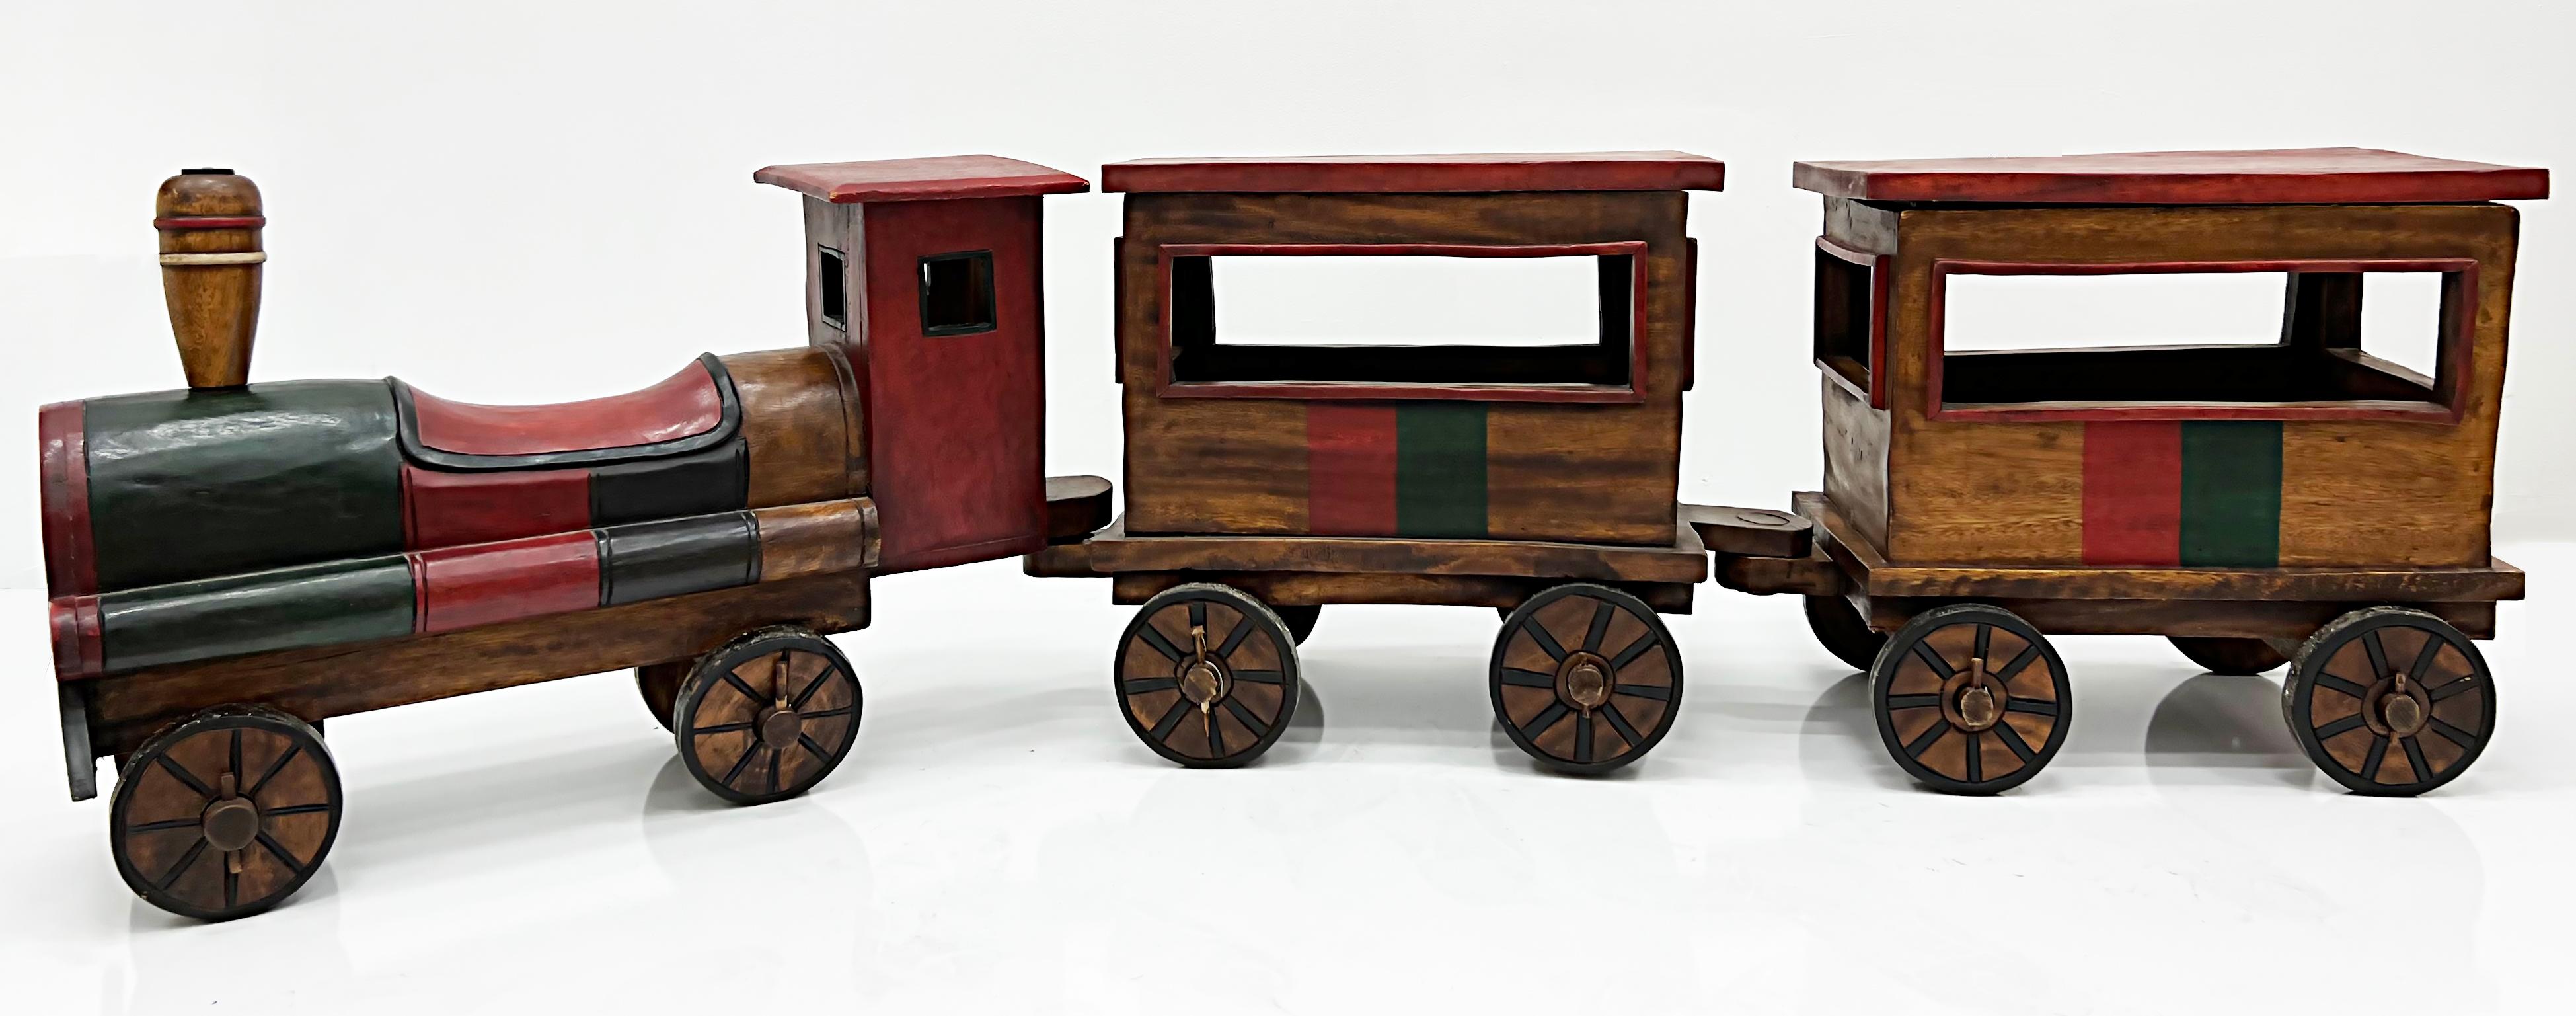 20th Century Overscale Vintage Carved Wood Folk Art Toy Train Set, 3 Pieces For Sale